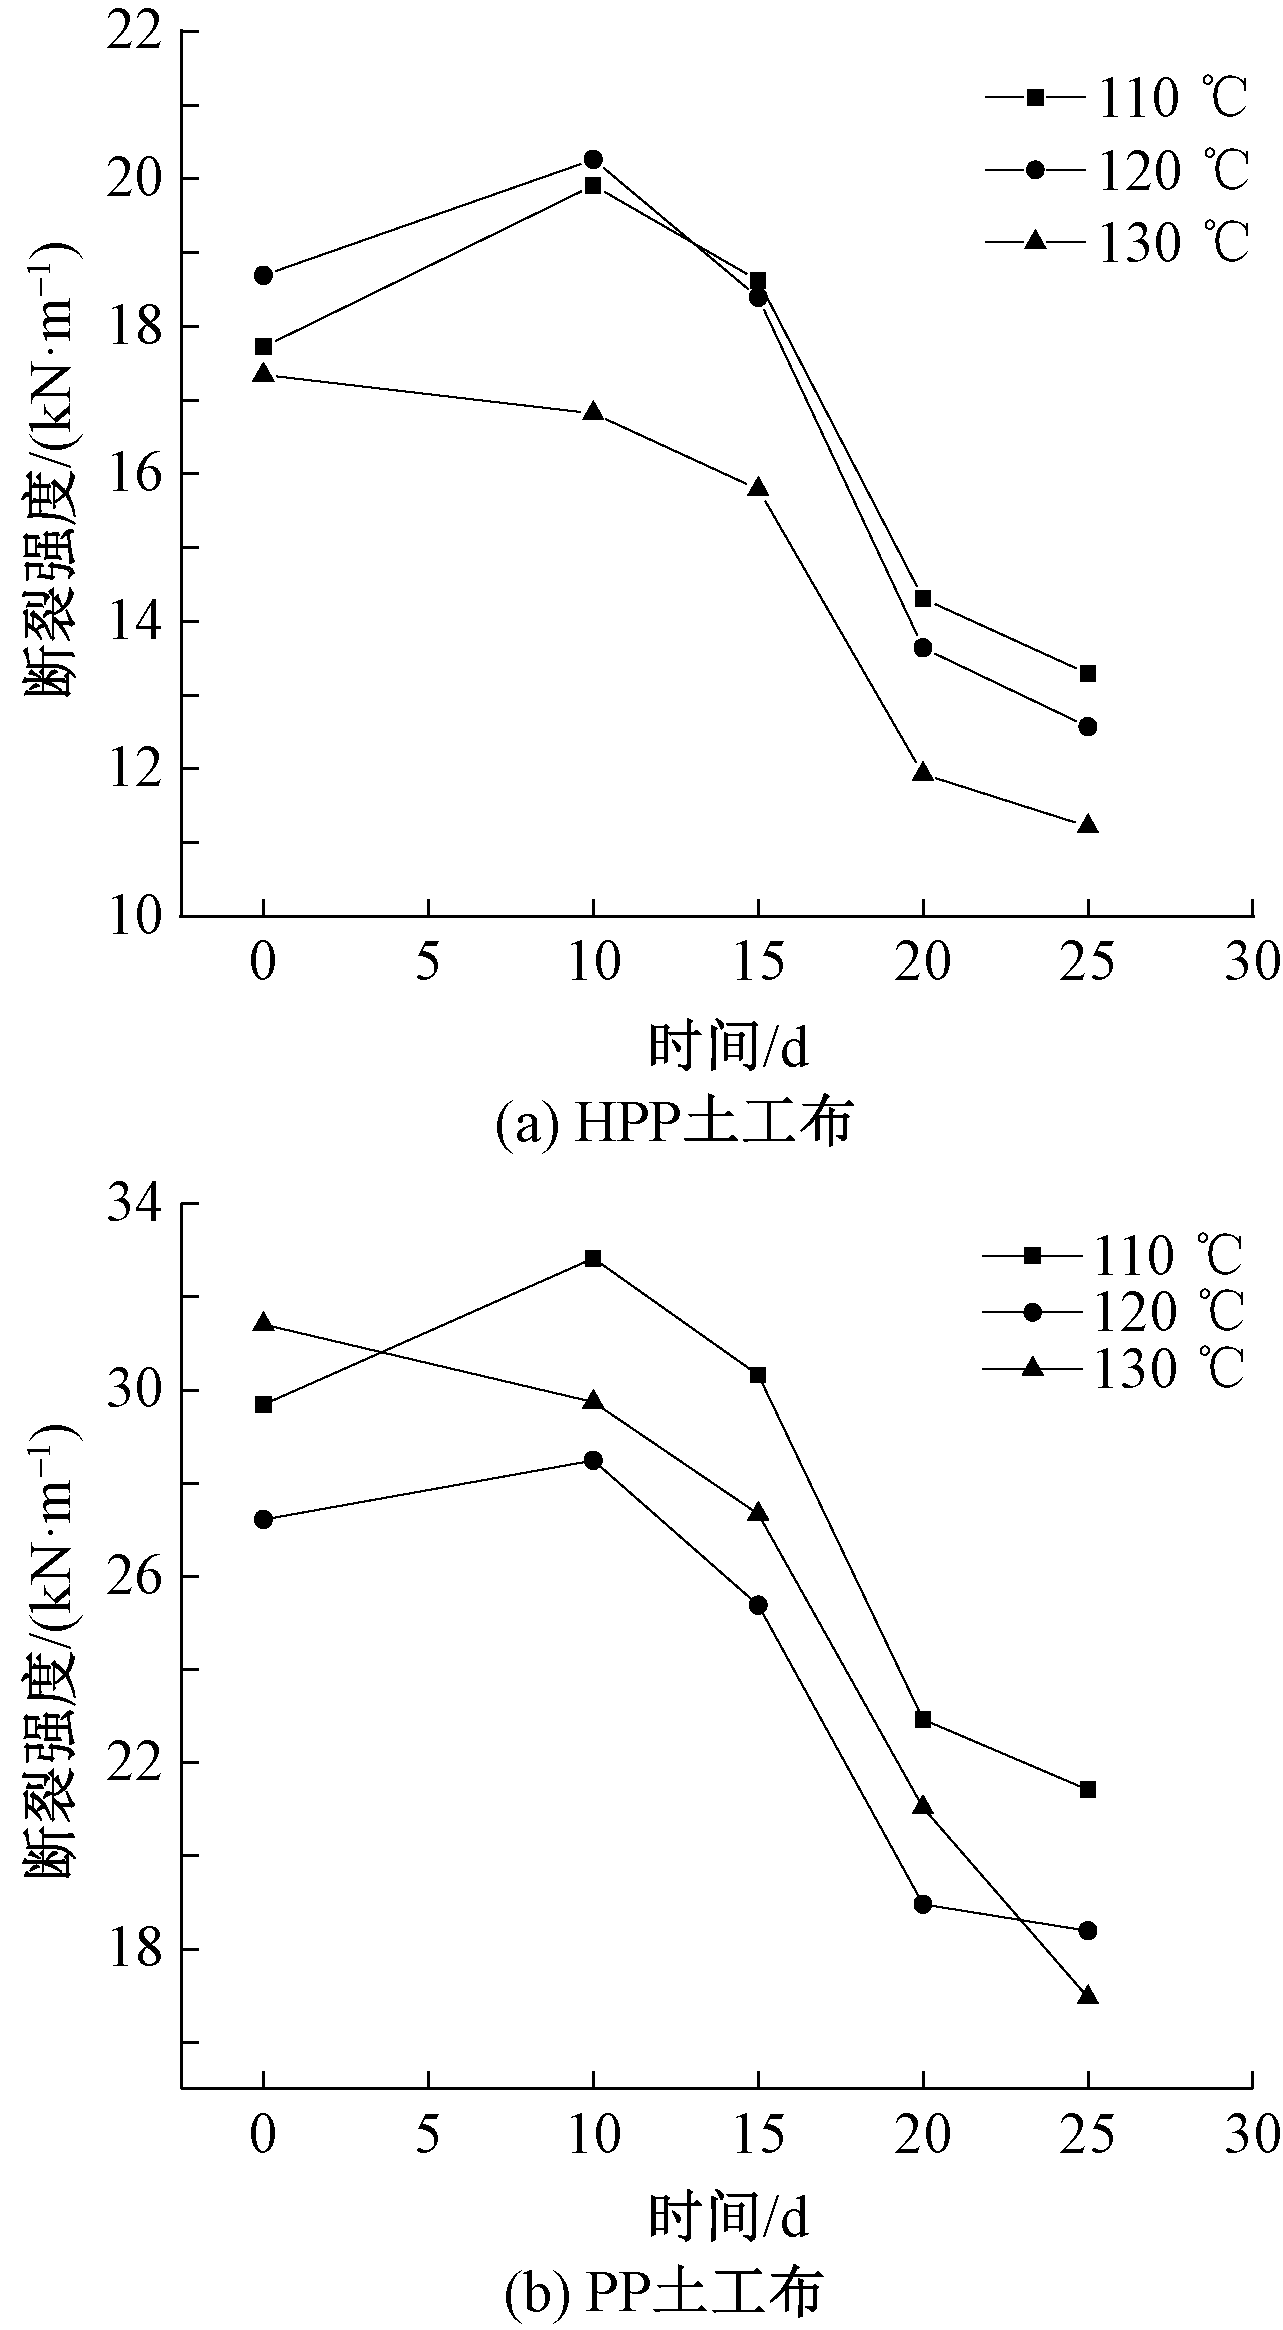 Curve of longitudinal breaking strength and thermo- oxidative aging time of HPP geotextiles (a) and PP teotextiles (b) at different temperatures